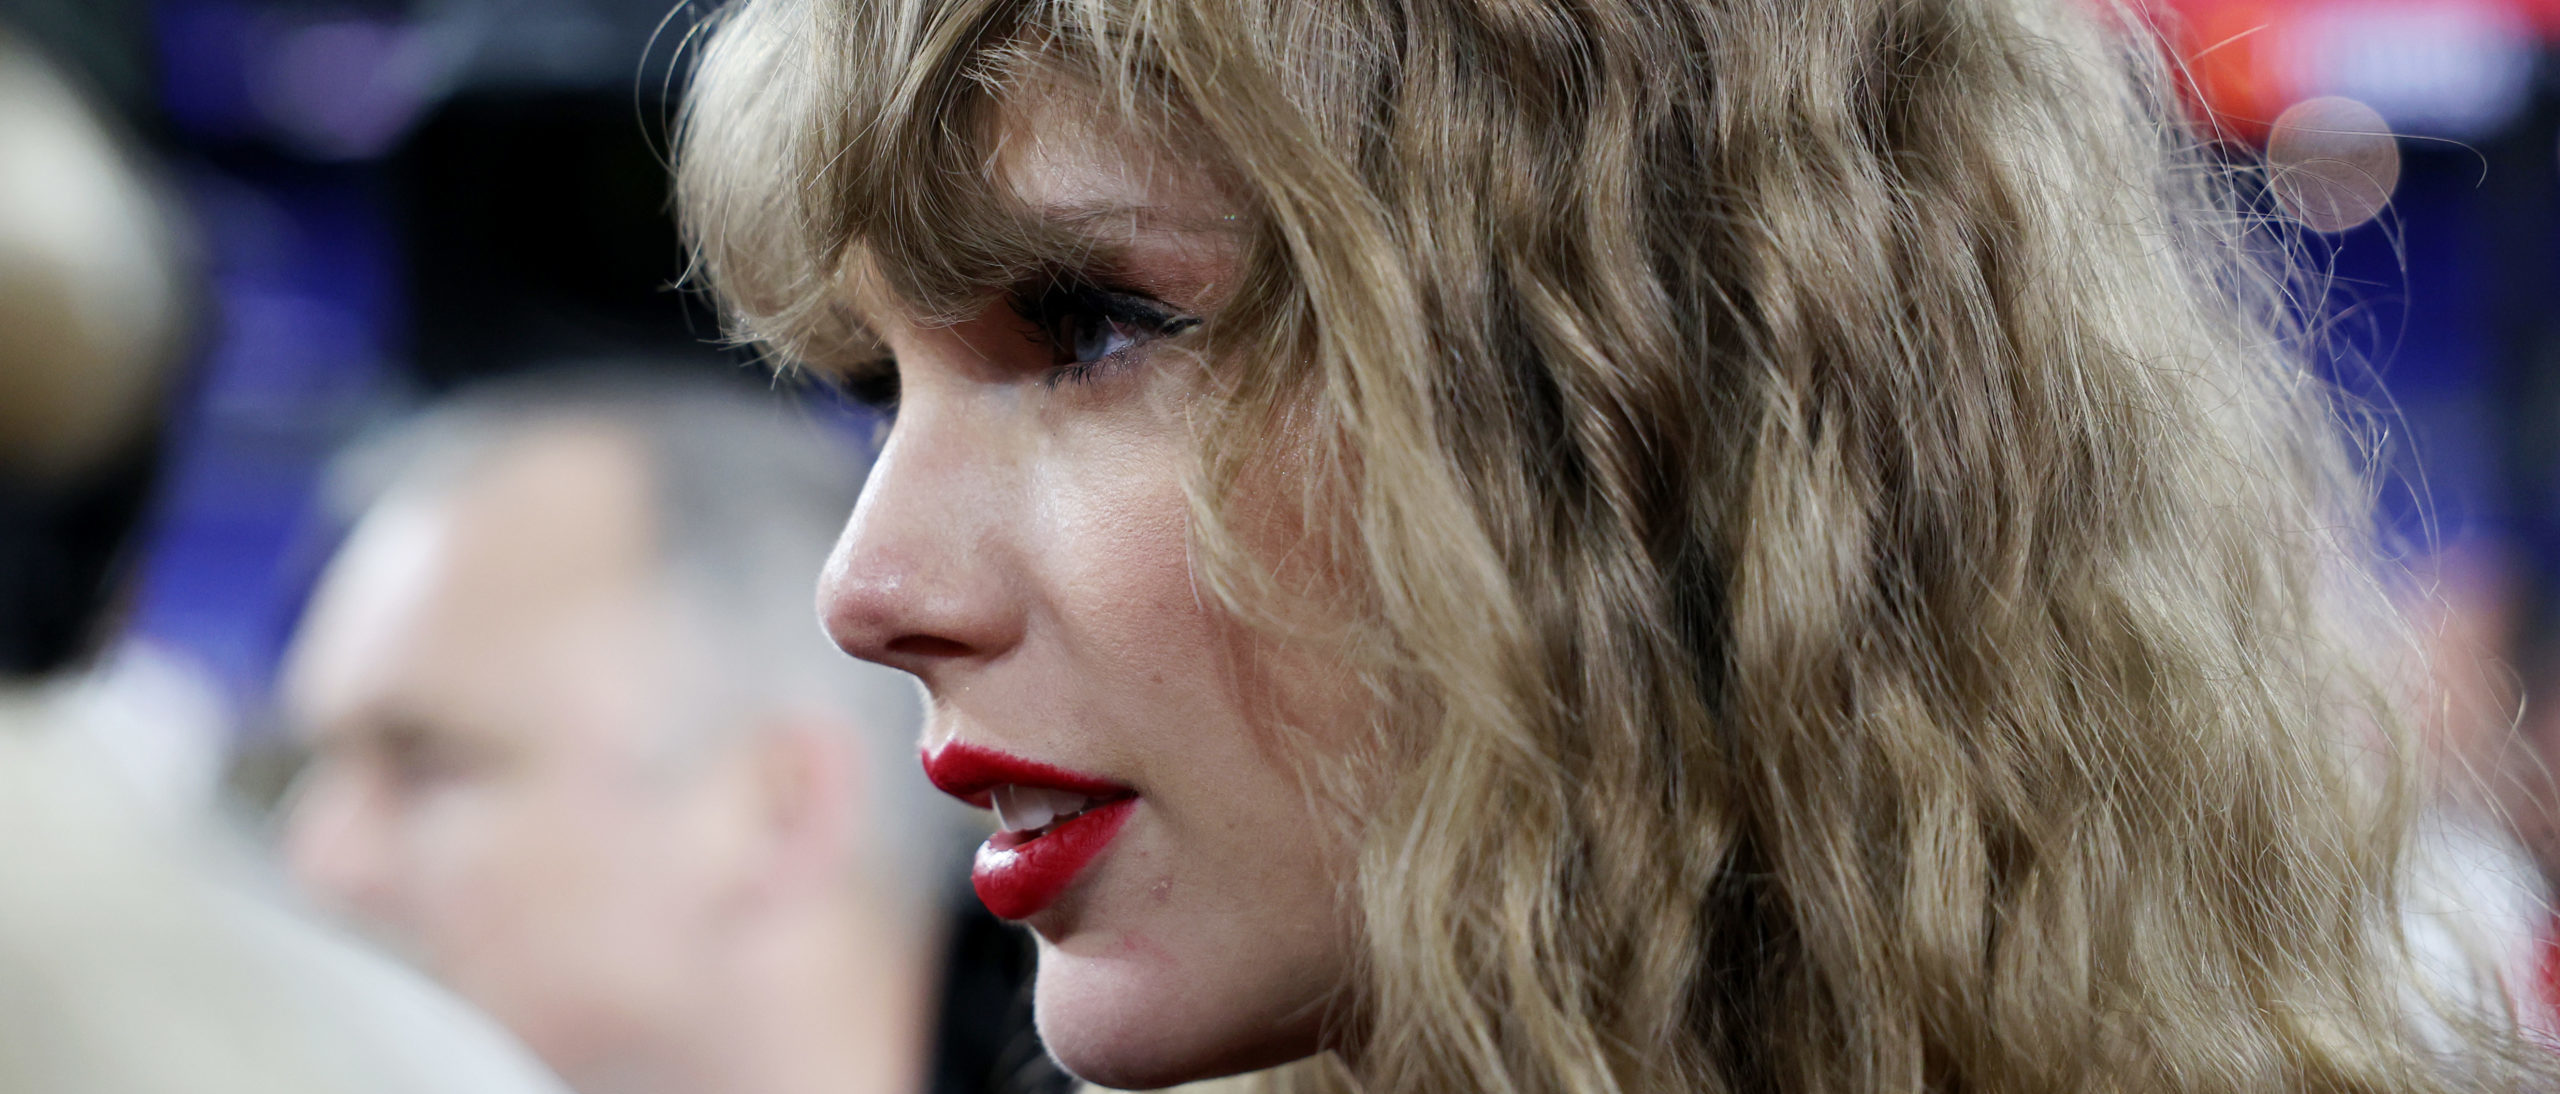 ‘The Taylor Swift Effect’: Pop Queen Sells Out Super Bowl Commercials Quickly For The NFL